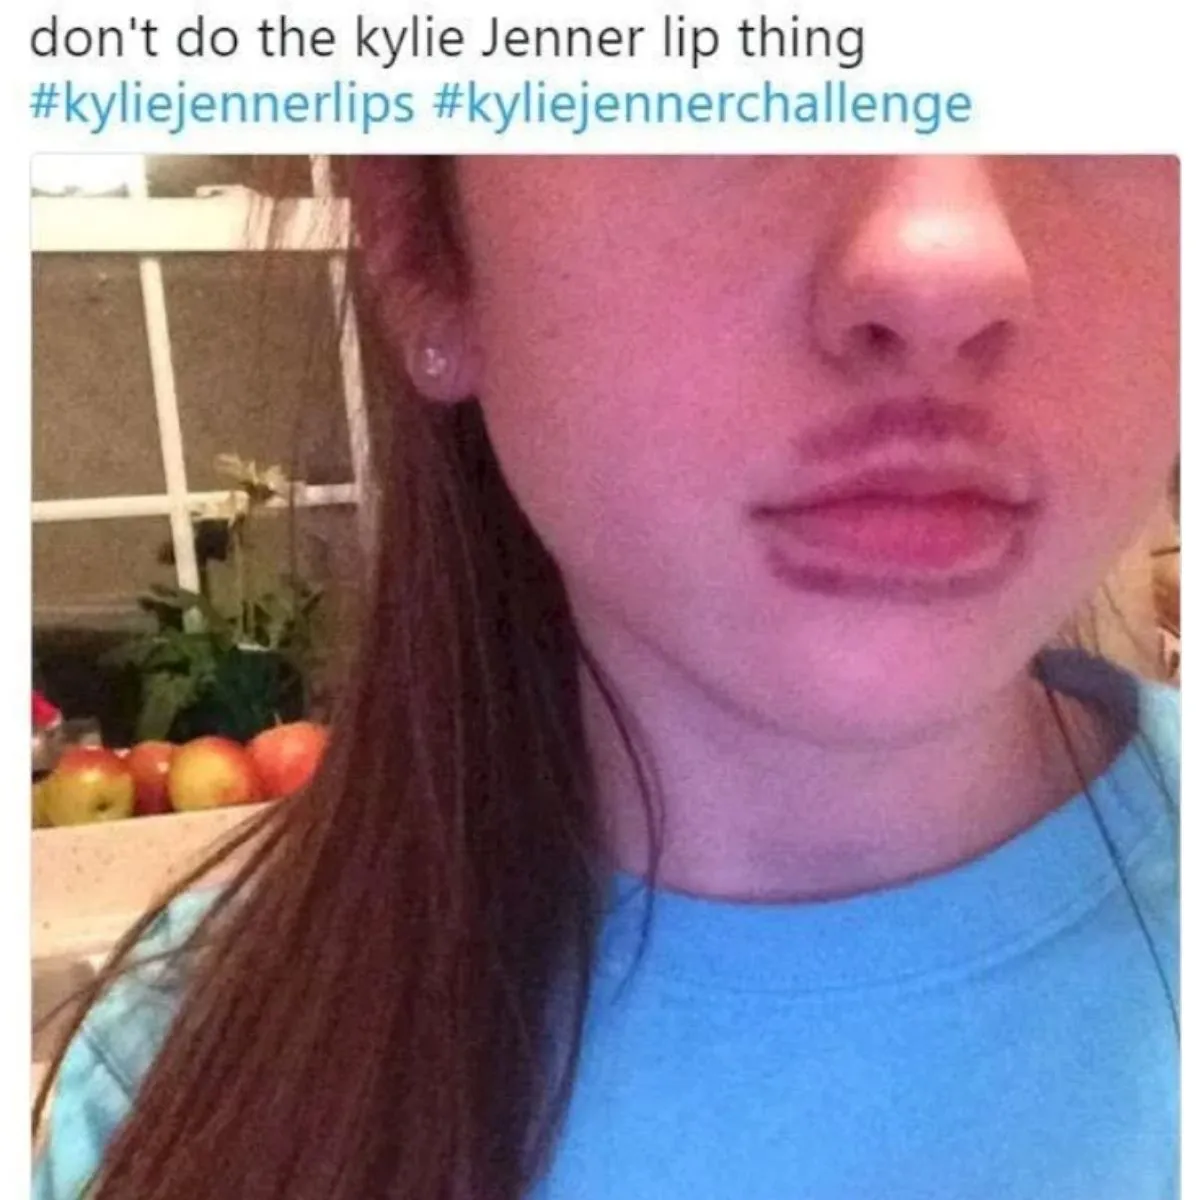 Girl with bruised lips after attempting the kylie jenner lip challenge